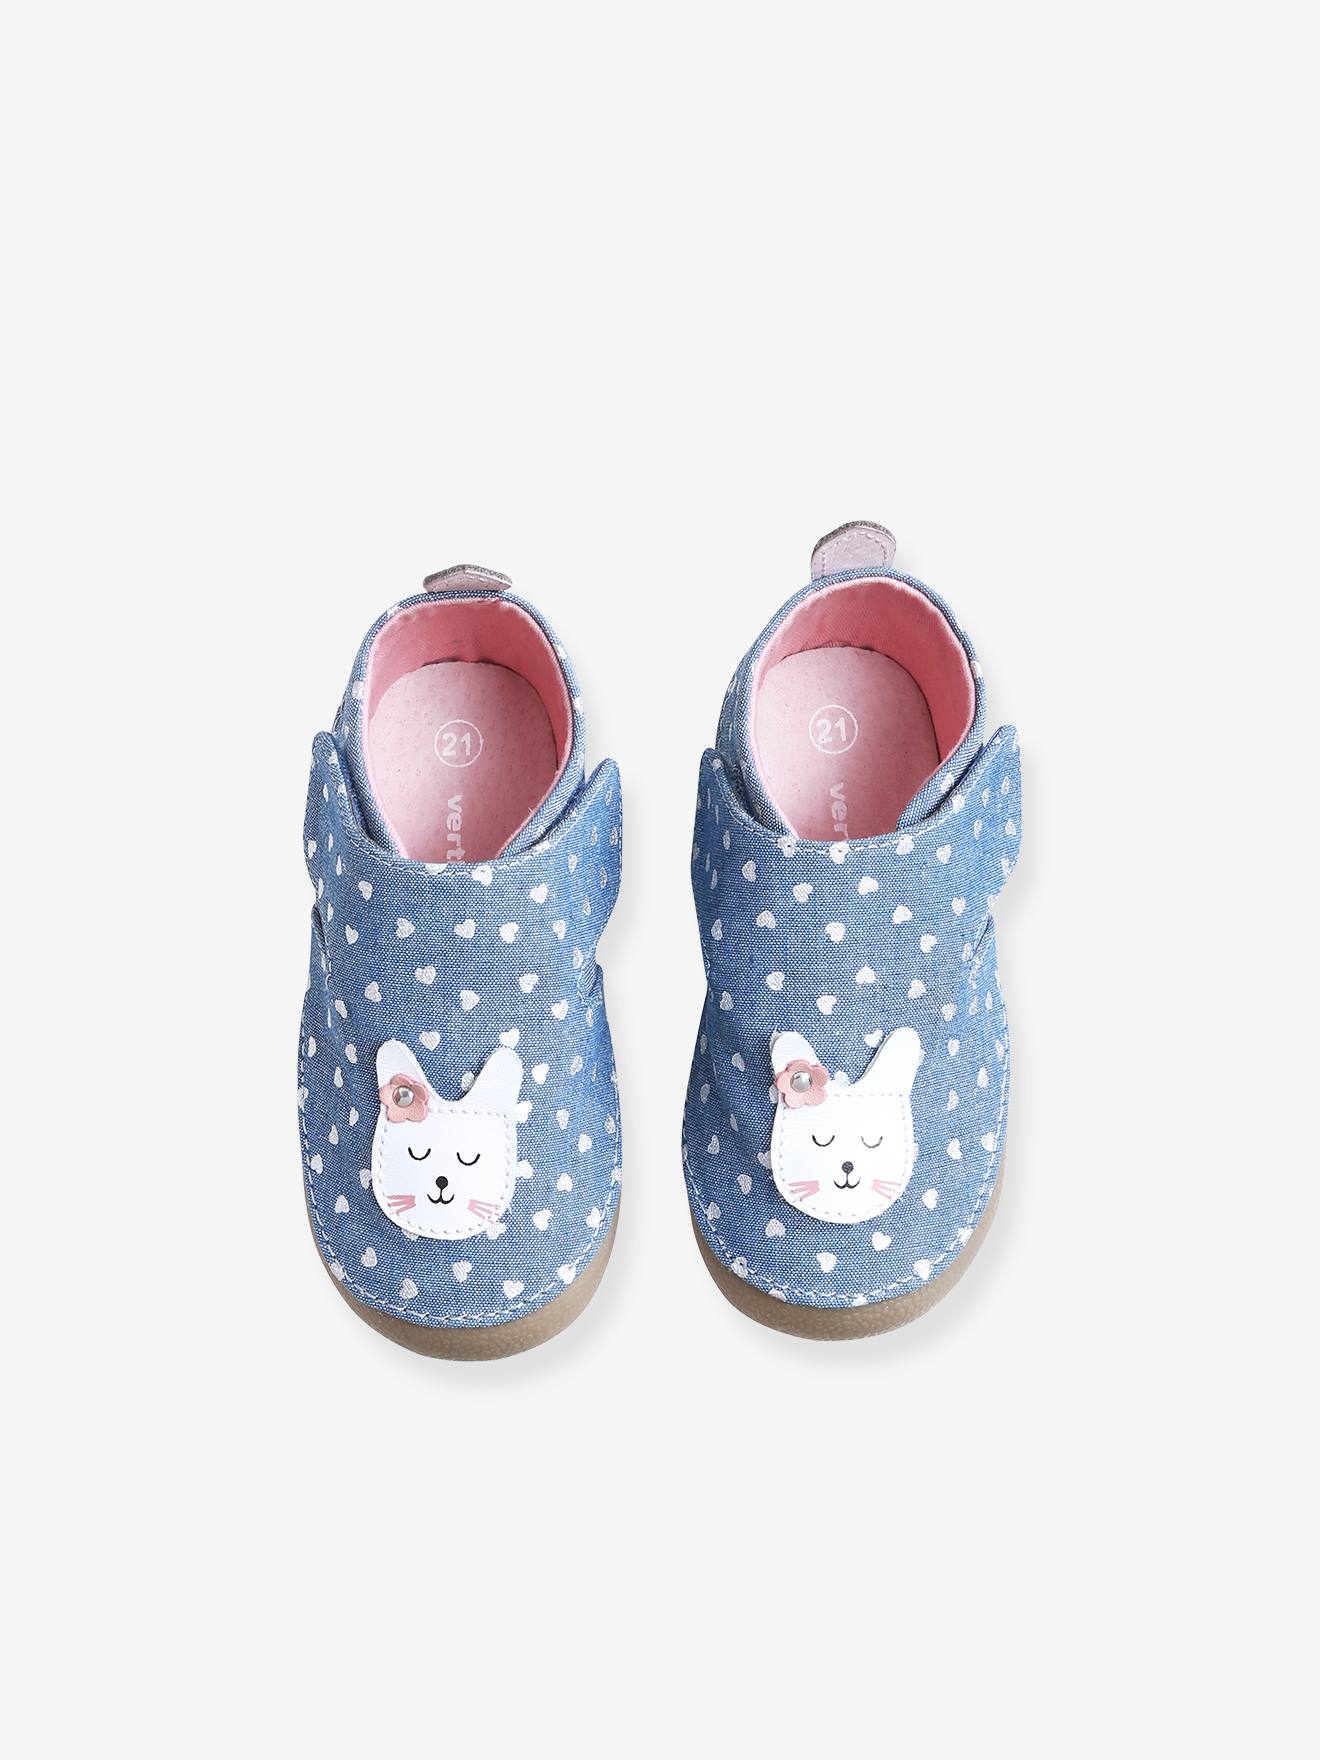 Neuf Filles BEBE chaussons 